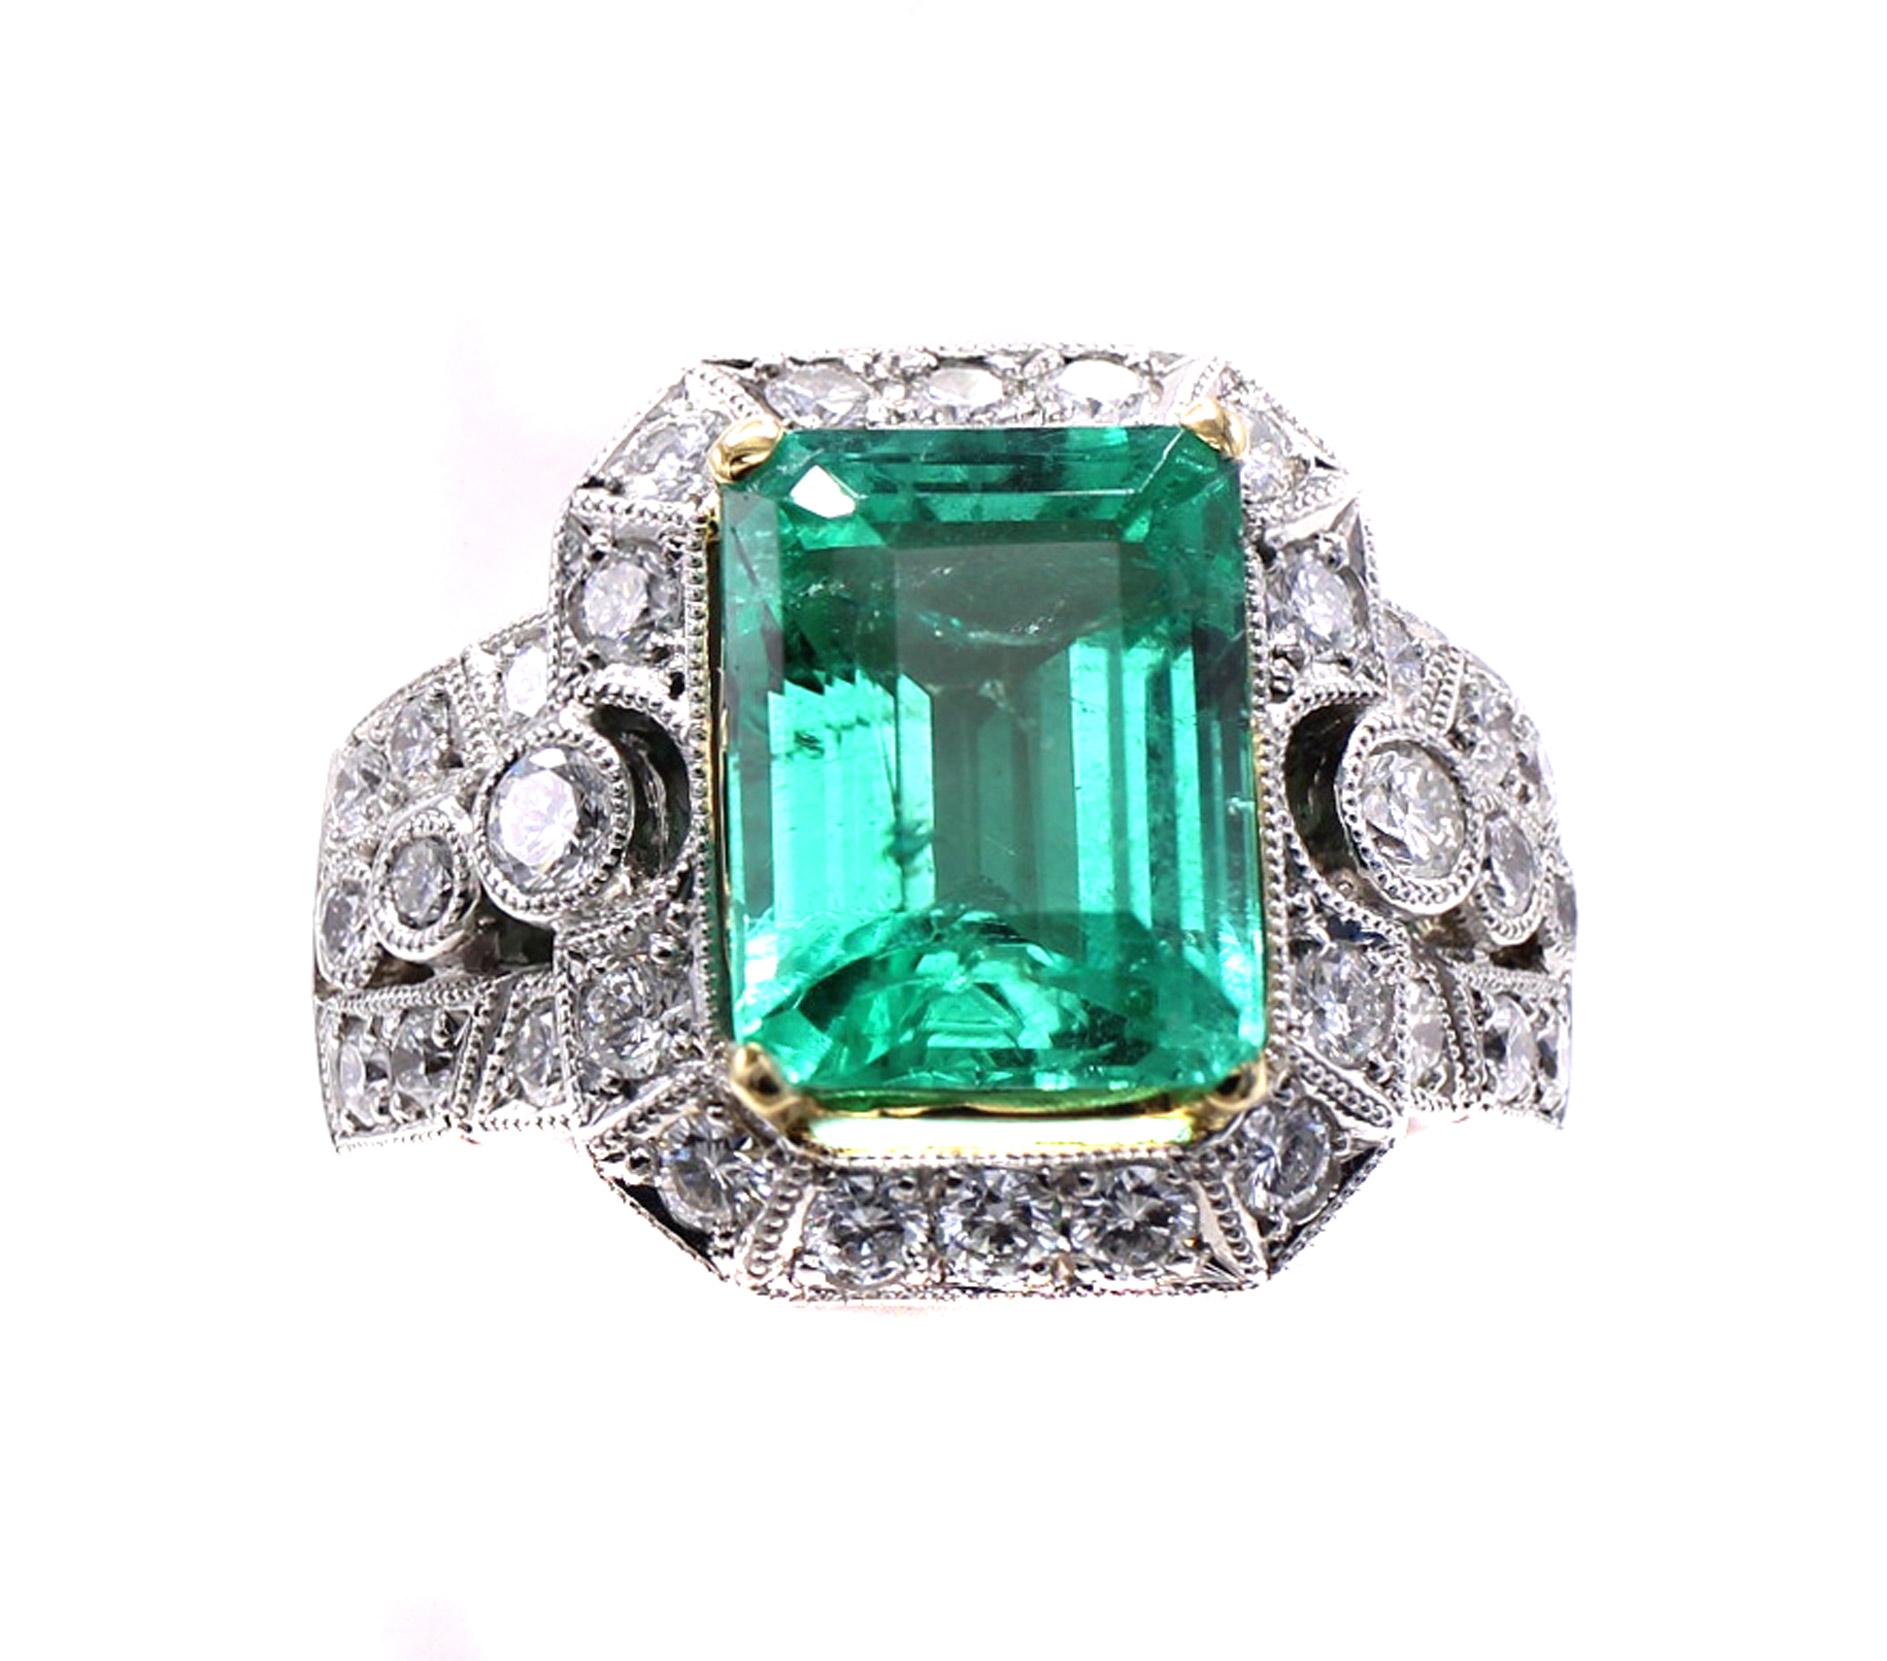 Emerald Cut Colombian Emerald Diamond Engagement Ring For Sale